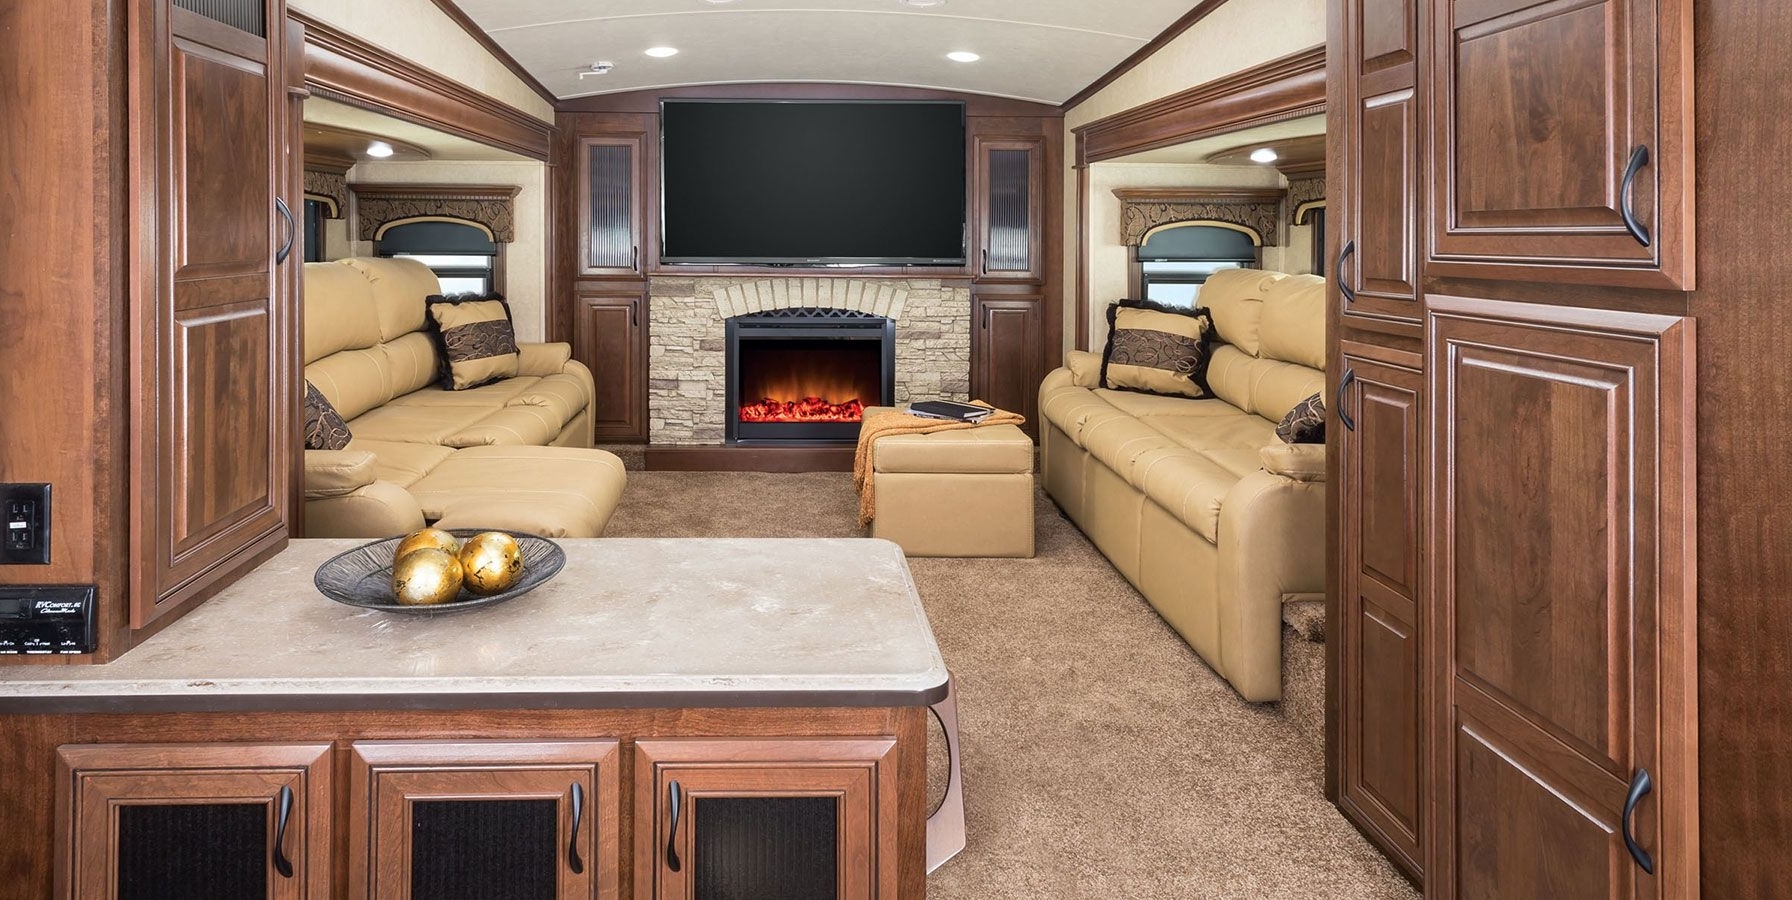 Fifth Wheel Campers With Front Living Rooms 02 